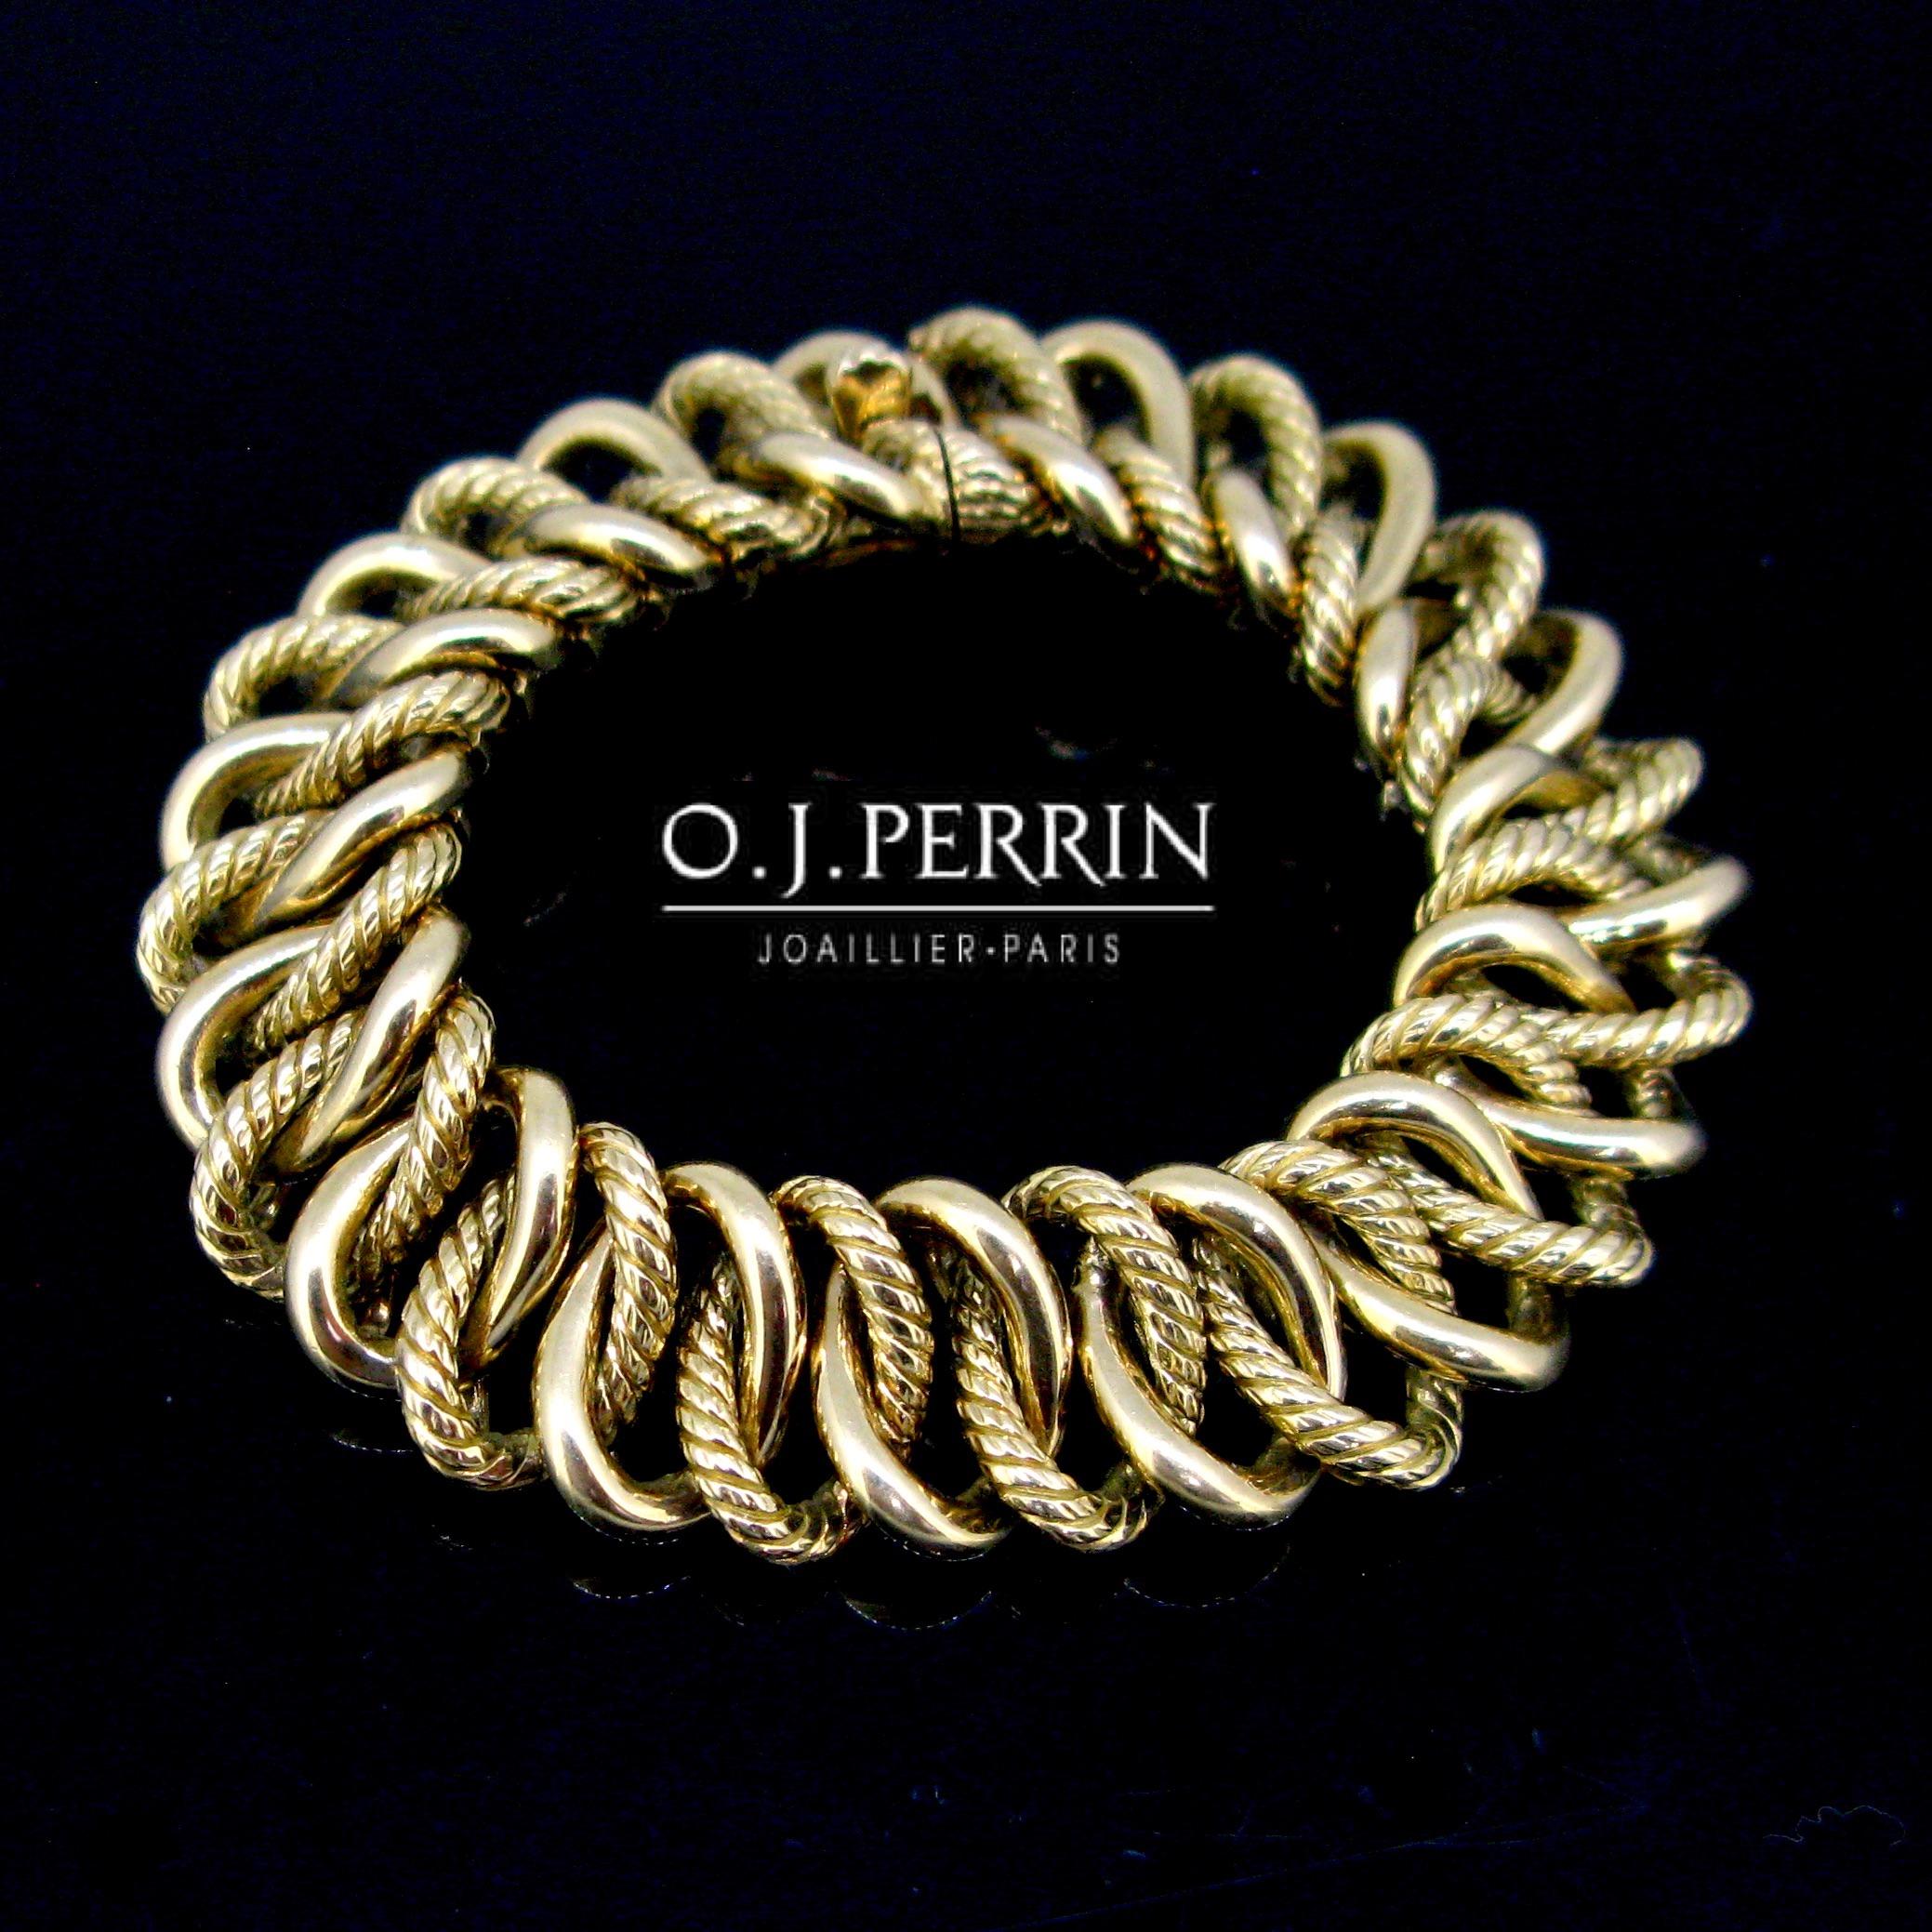 Weight: 84gr


Metal: 18kt yellow gold


Condition: Very good


Signature: OJ Perrin


Hallmarks: French, eagle and rhinoceros’ heads
Maker’s mark: G / Dice over a wing/ L


Comments: This curb links bracelet is fully made in 18kt yellow solid gold.